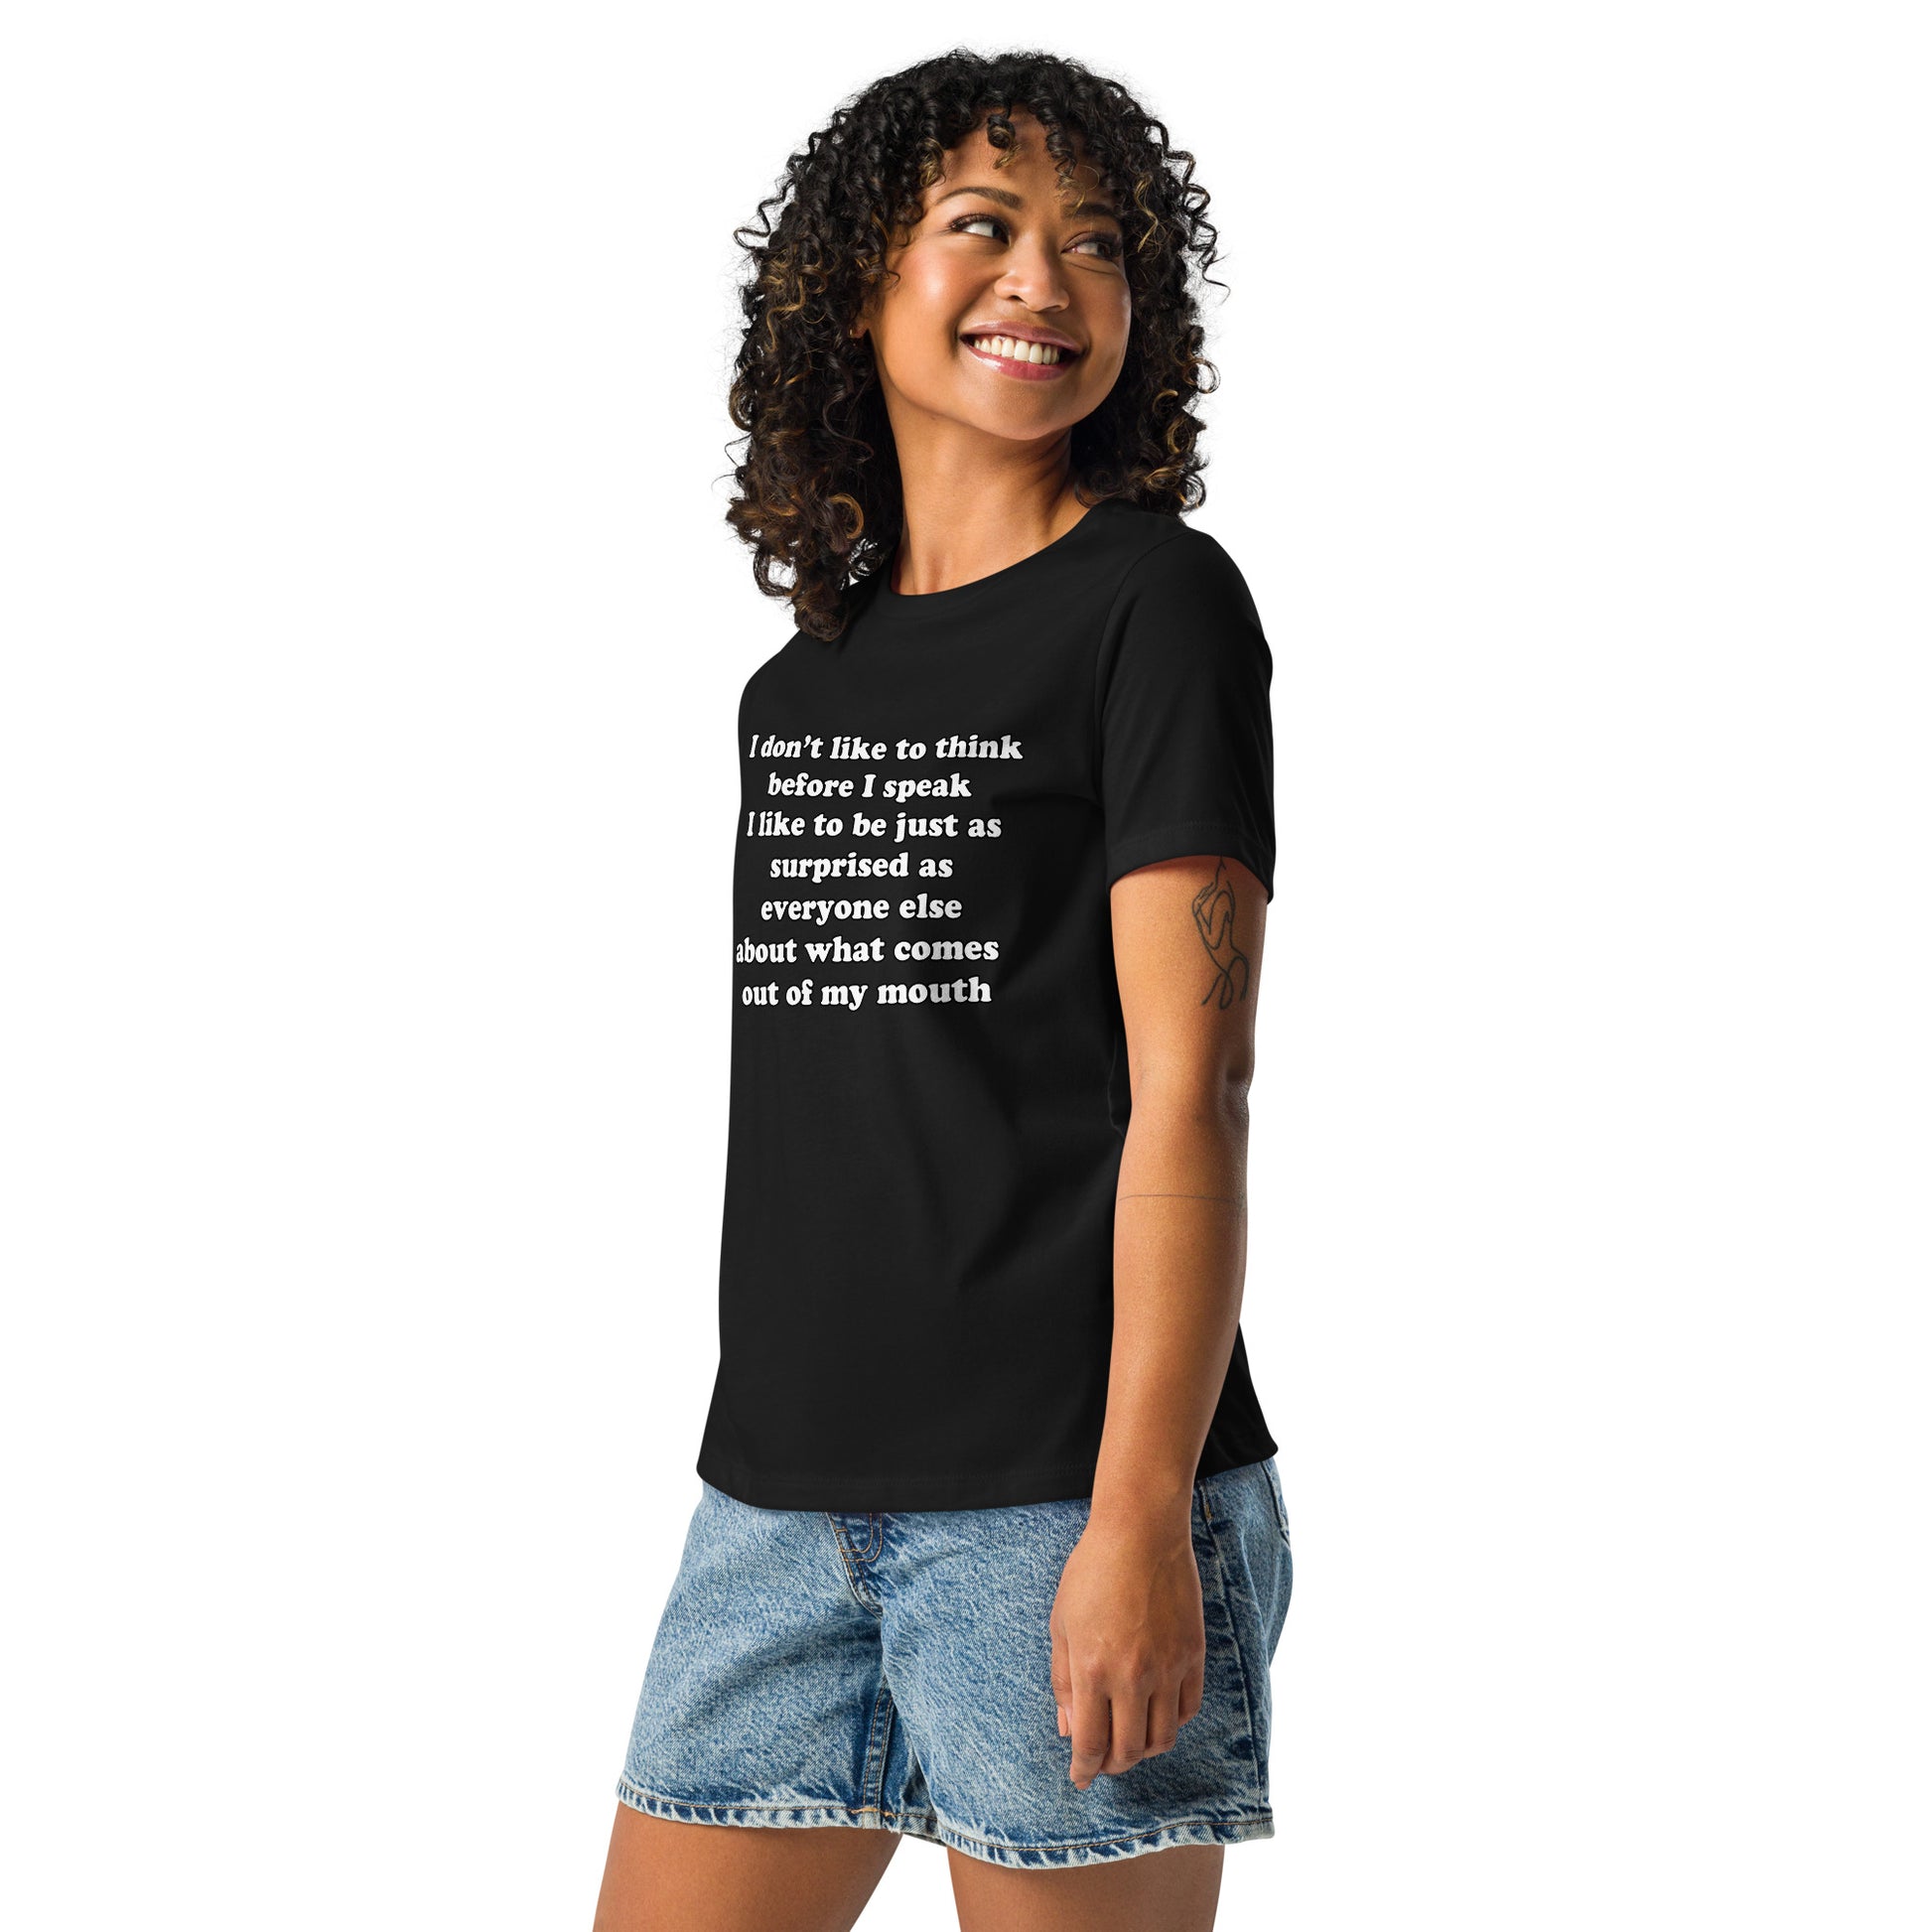 Woman with black t-shirt with text “I don't think before I speak Just as serprised as everyone about what comes out of my mouth"